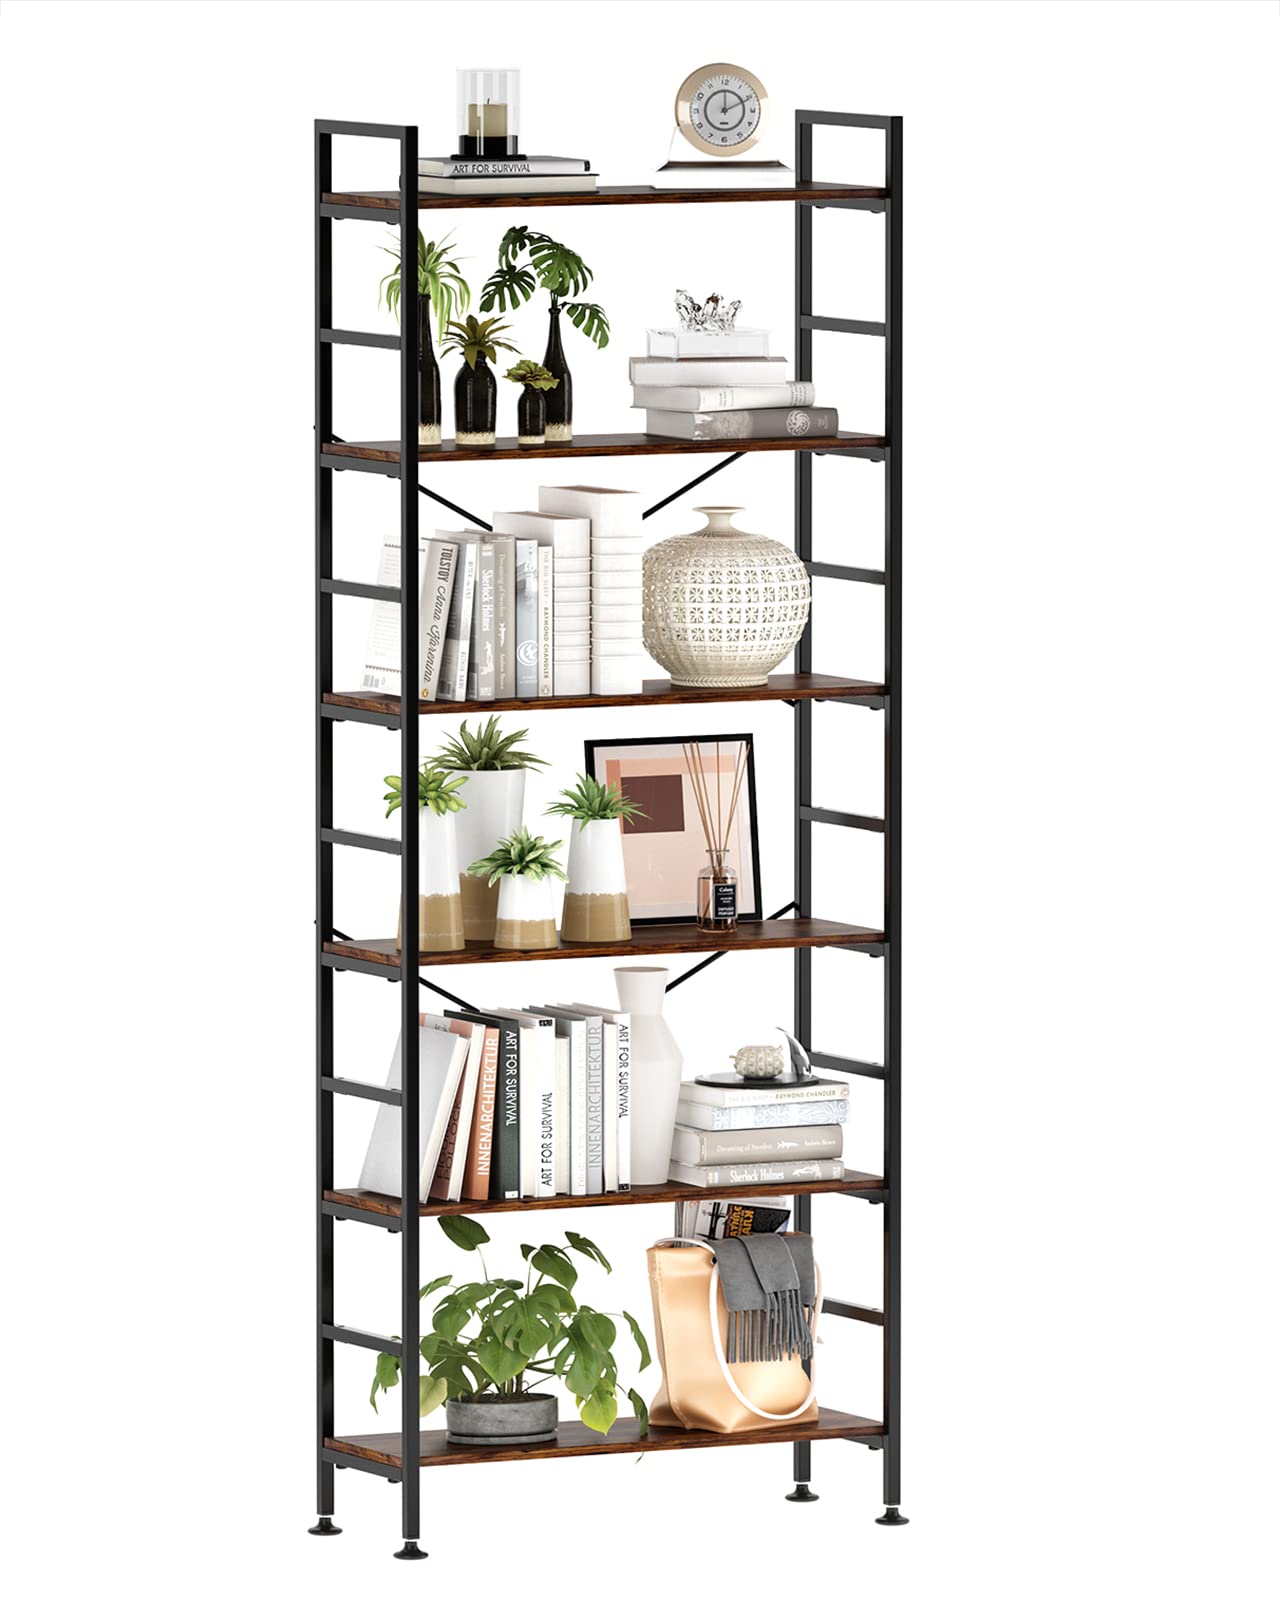 How to Choose the Perfect Shelving Unit for Your Office Space